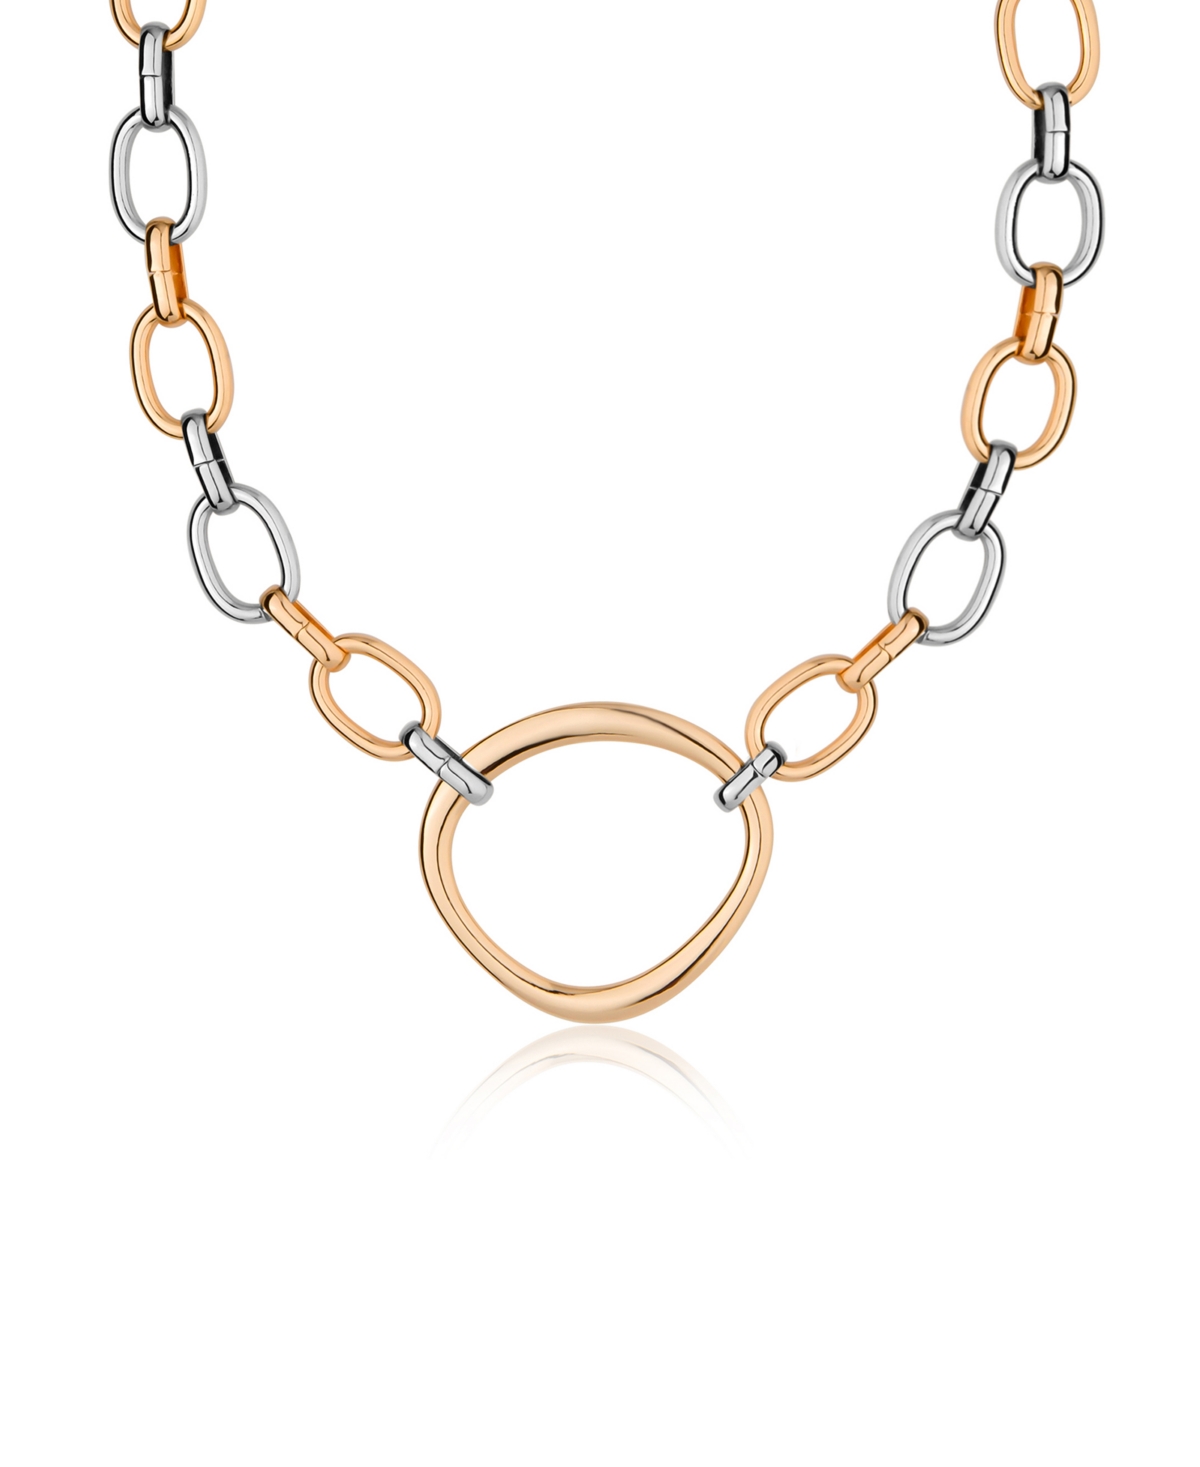 Mixed Metal Chain Link Collar Necklace - Rhodium